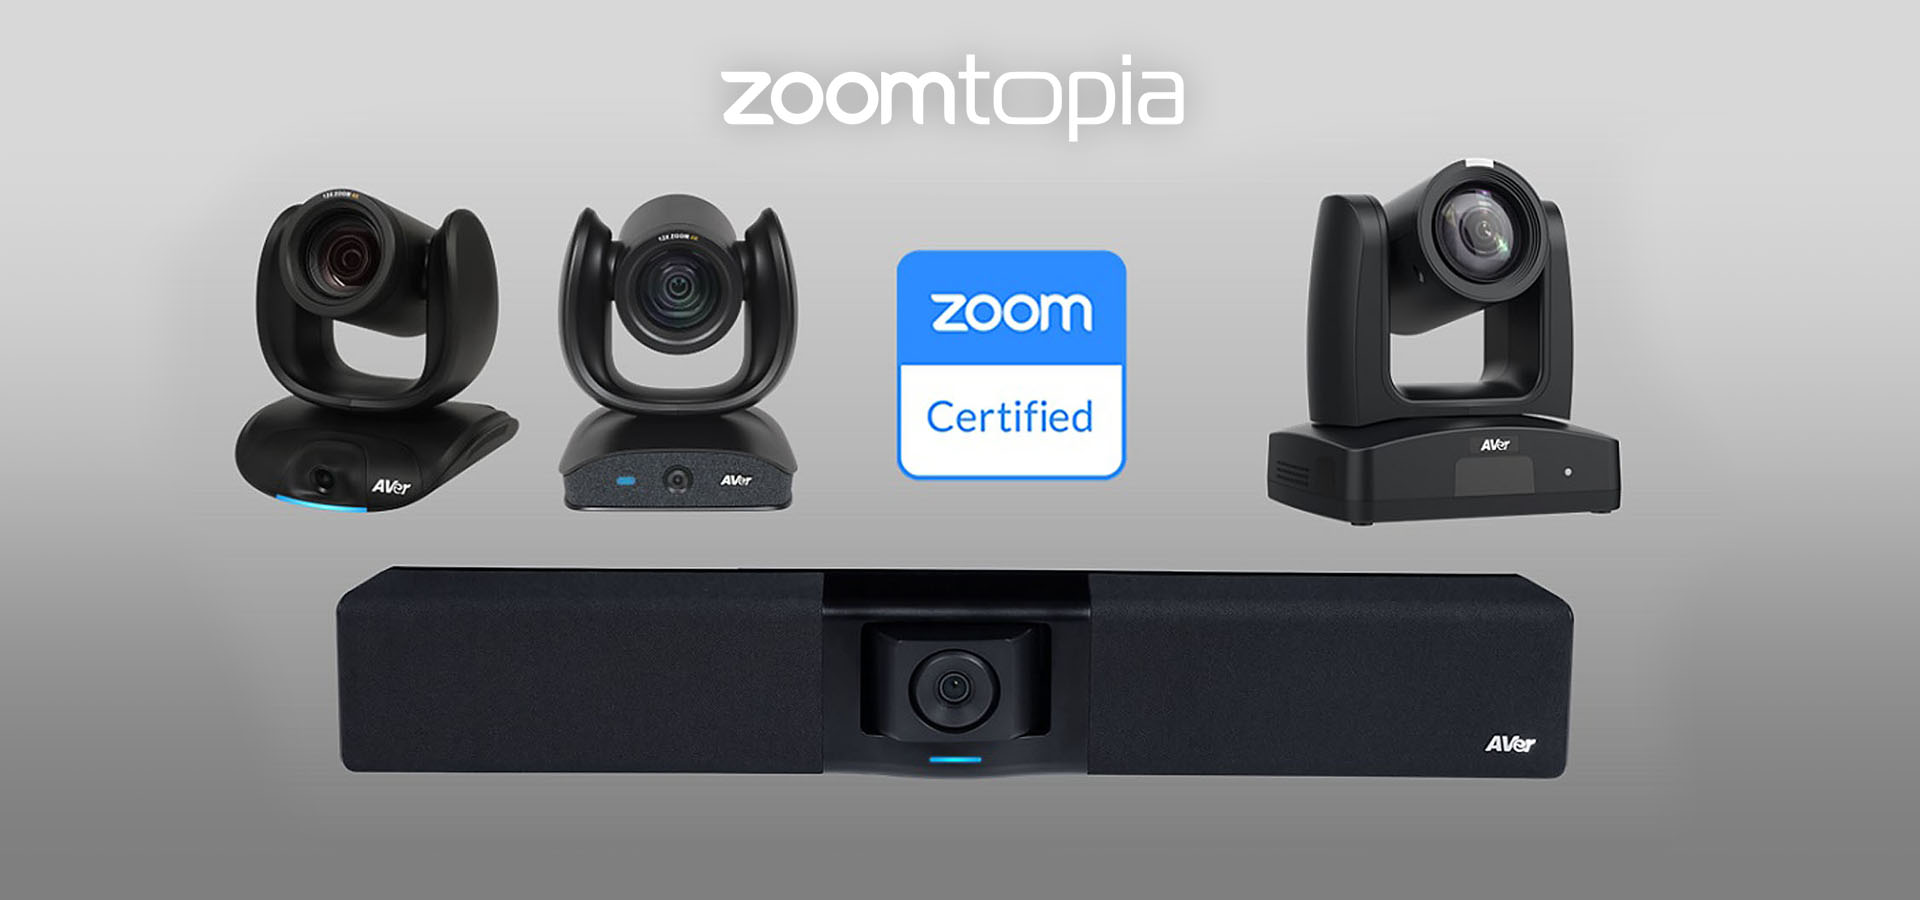 AVer to Showcase Zoom Certified Video Collaboration and Pro AV Solutions at Zoomtopia 2022